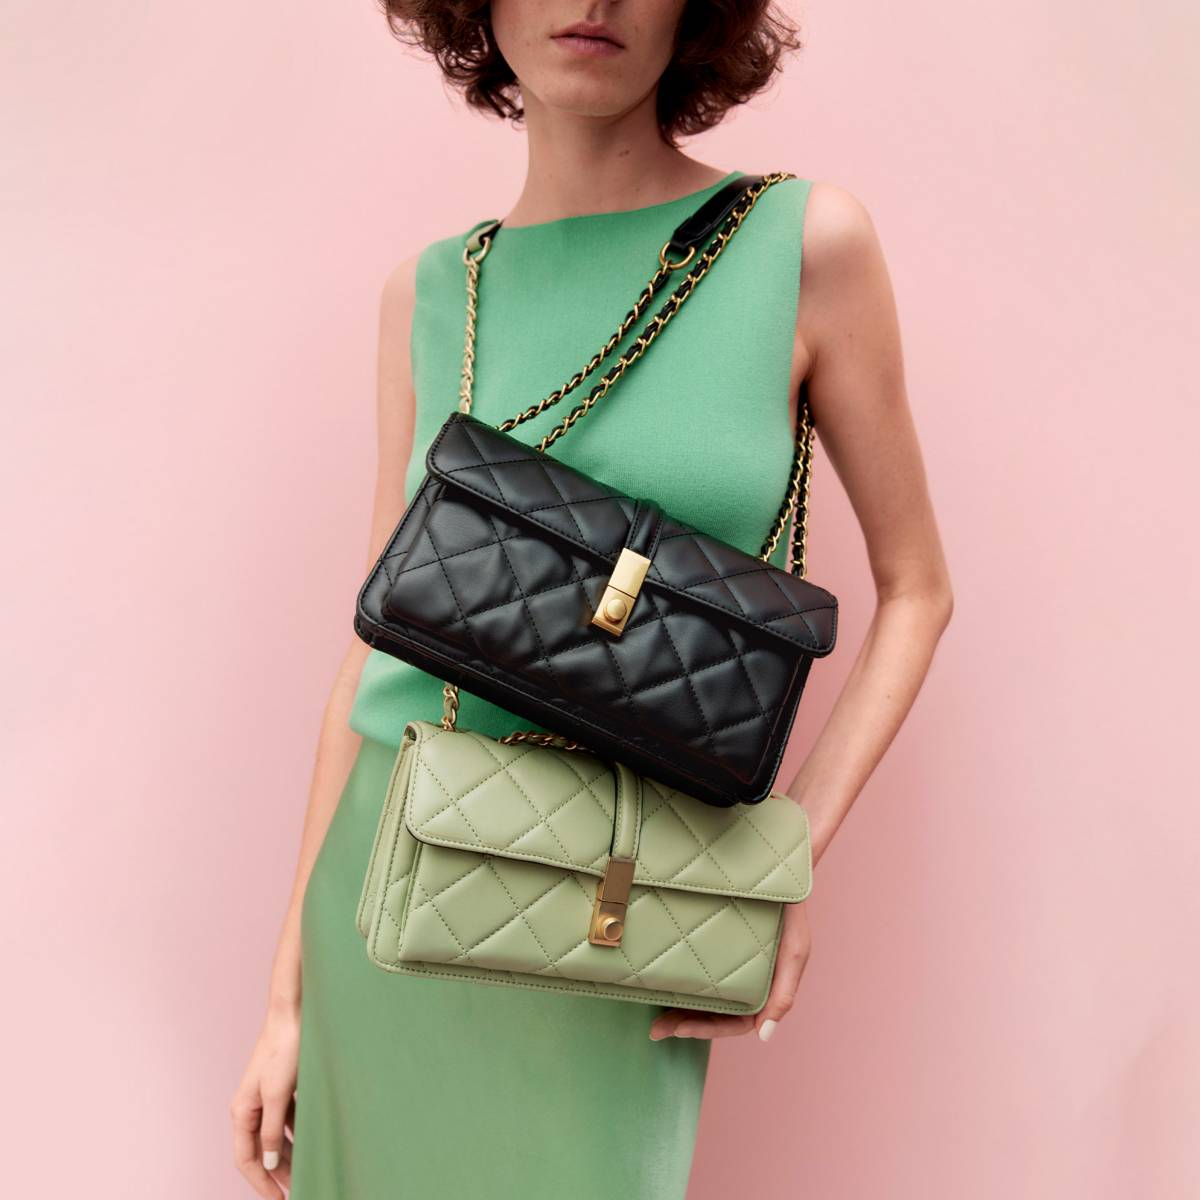  Woman wearing green outfit and quilted bags 